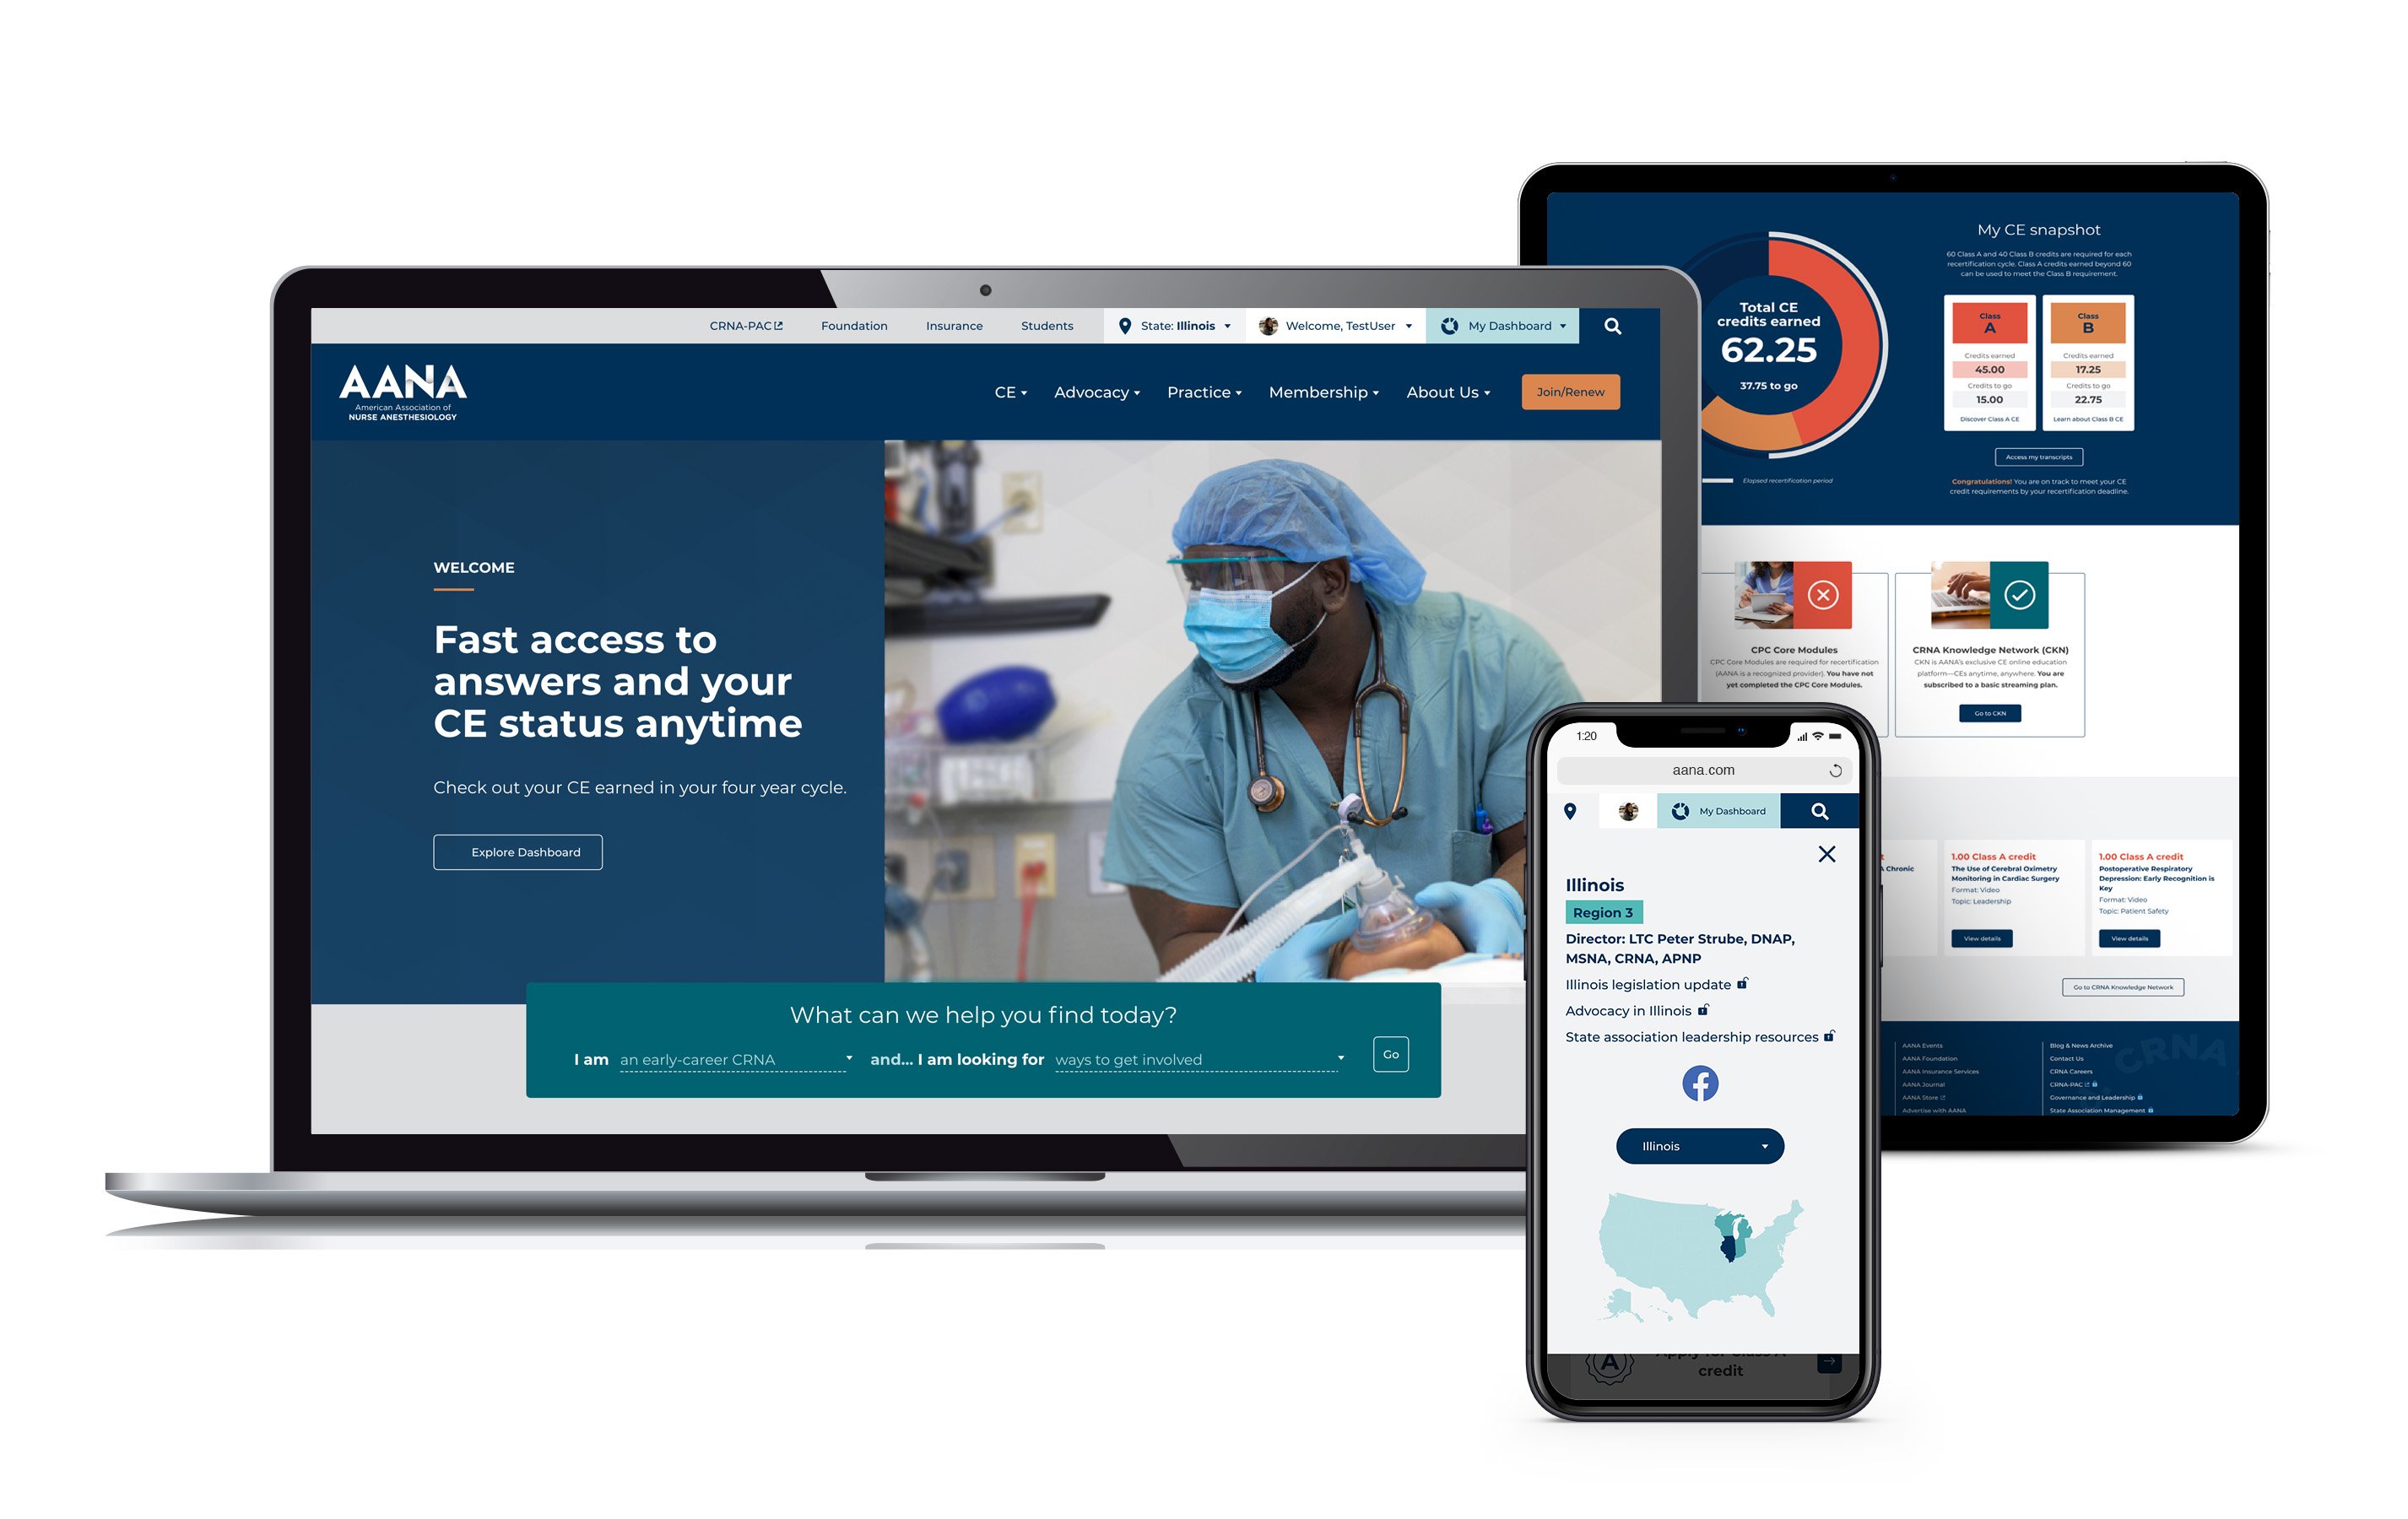 American Association of Nurse Anesthesiology website created by Vendi Advertising